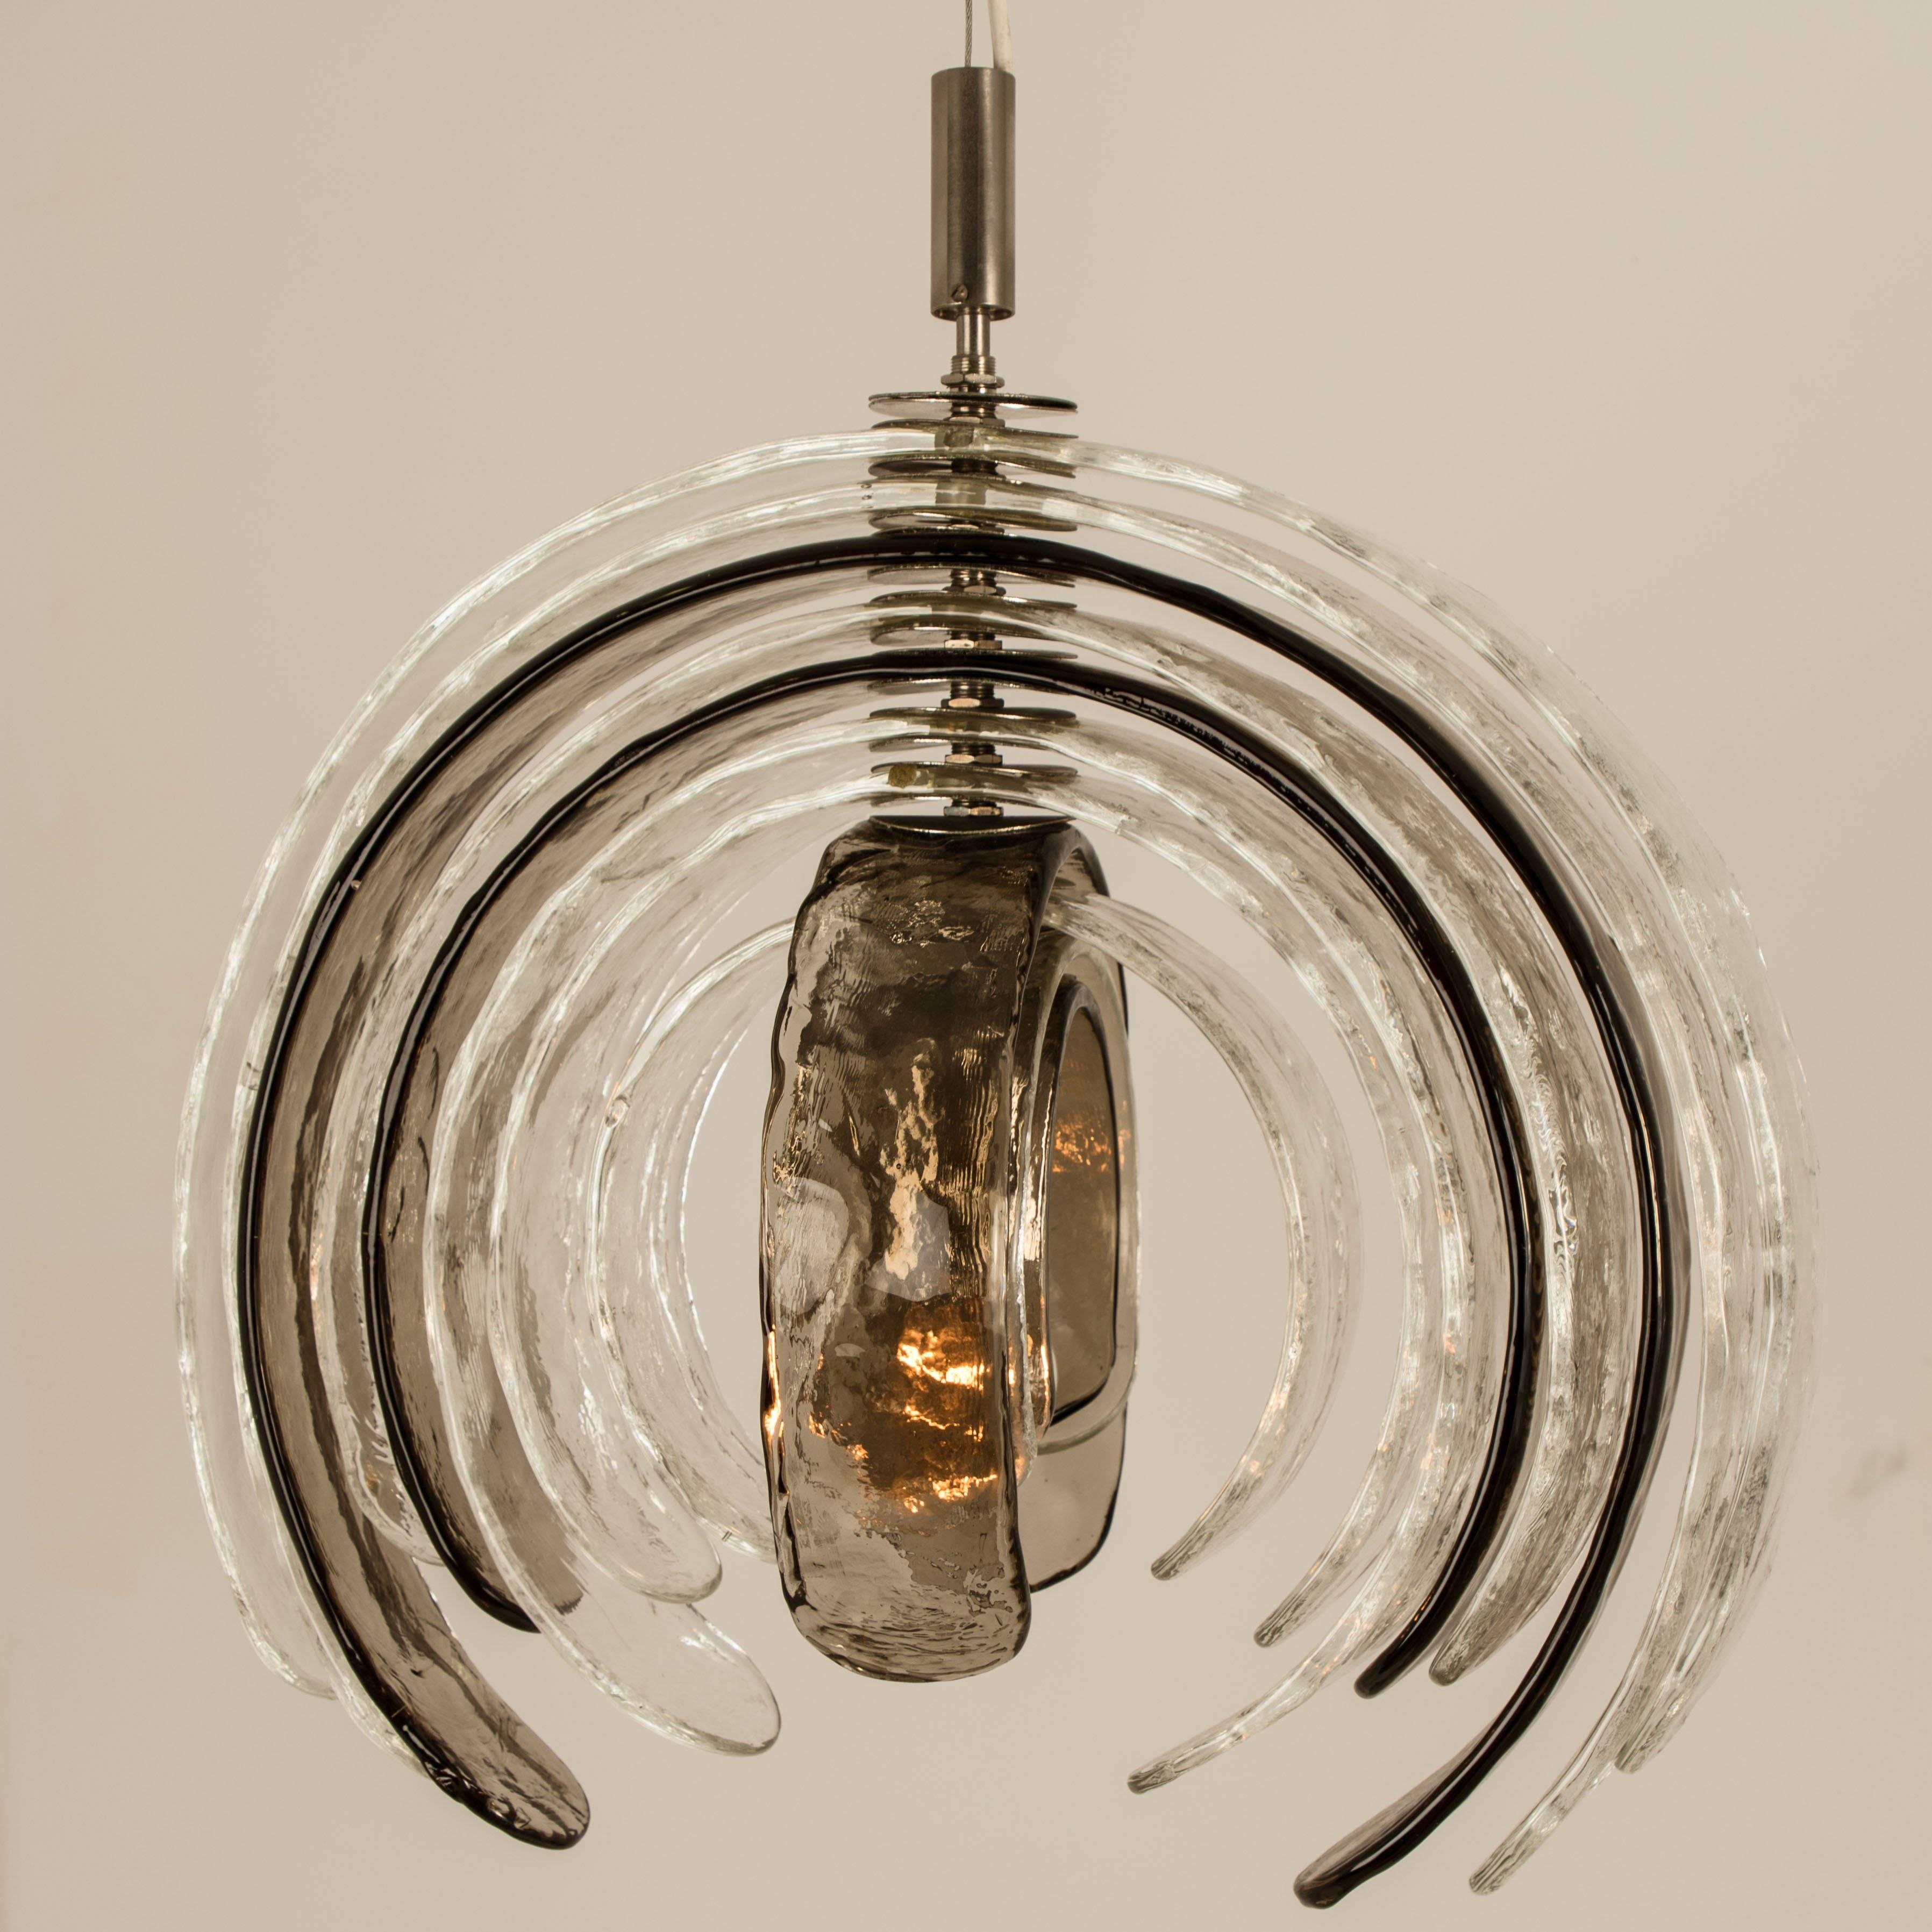 20th Century Pair of Sculptural Artichoke Chandeliers by Carlo Nason for Mazzega, Italy